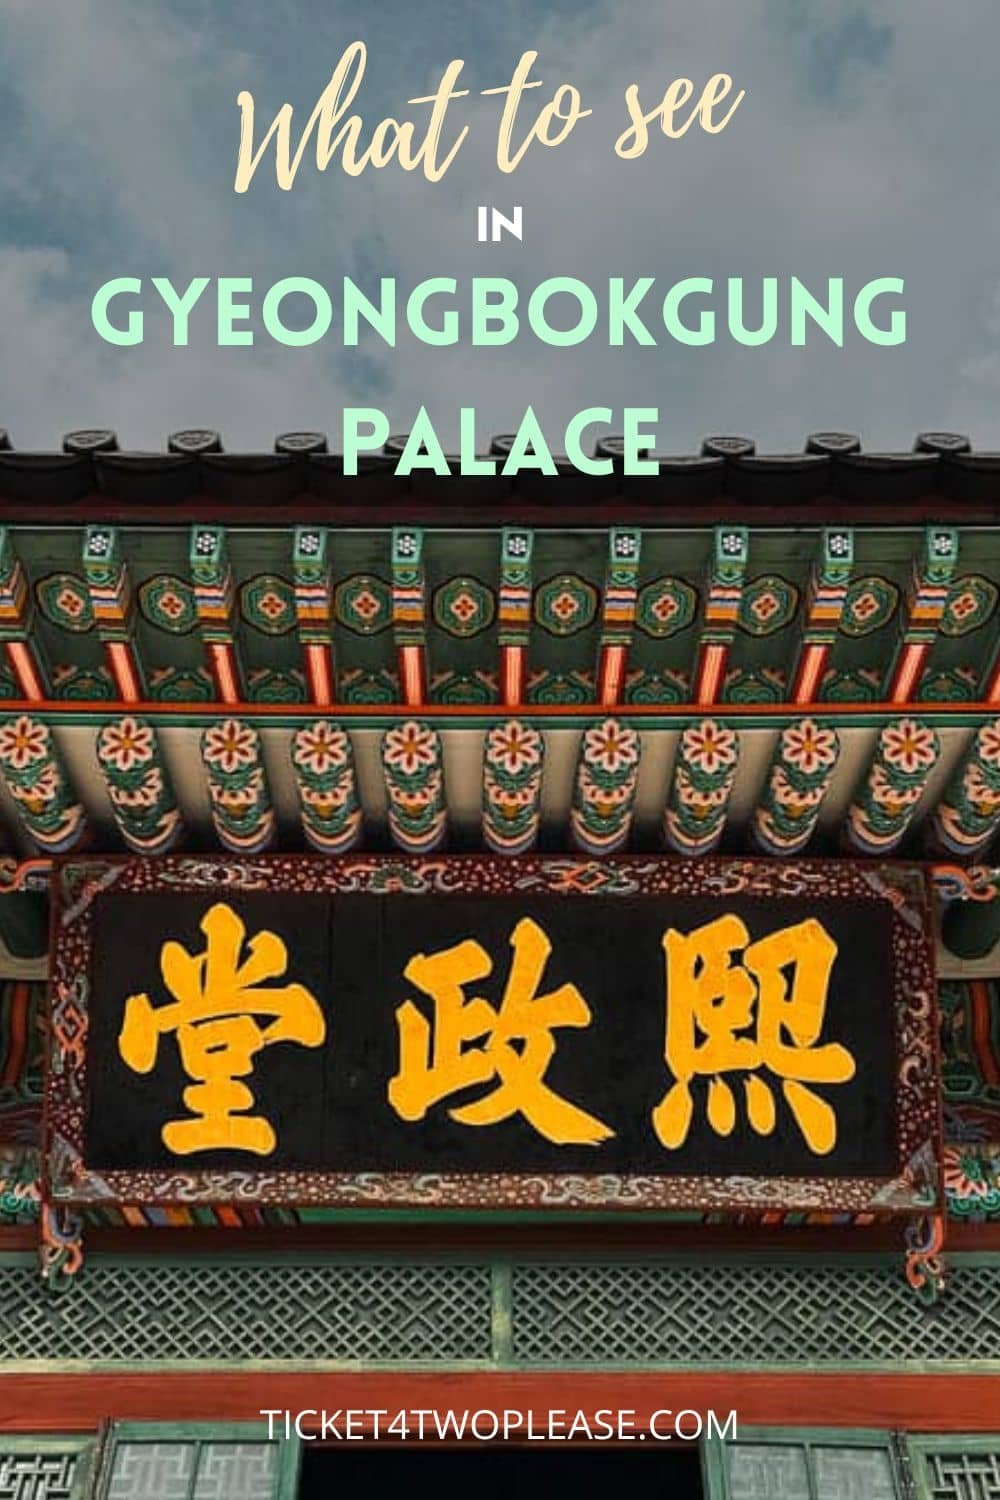 Visiting Gyeongbokgung Palace - Everything you need to know